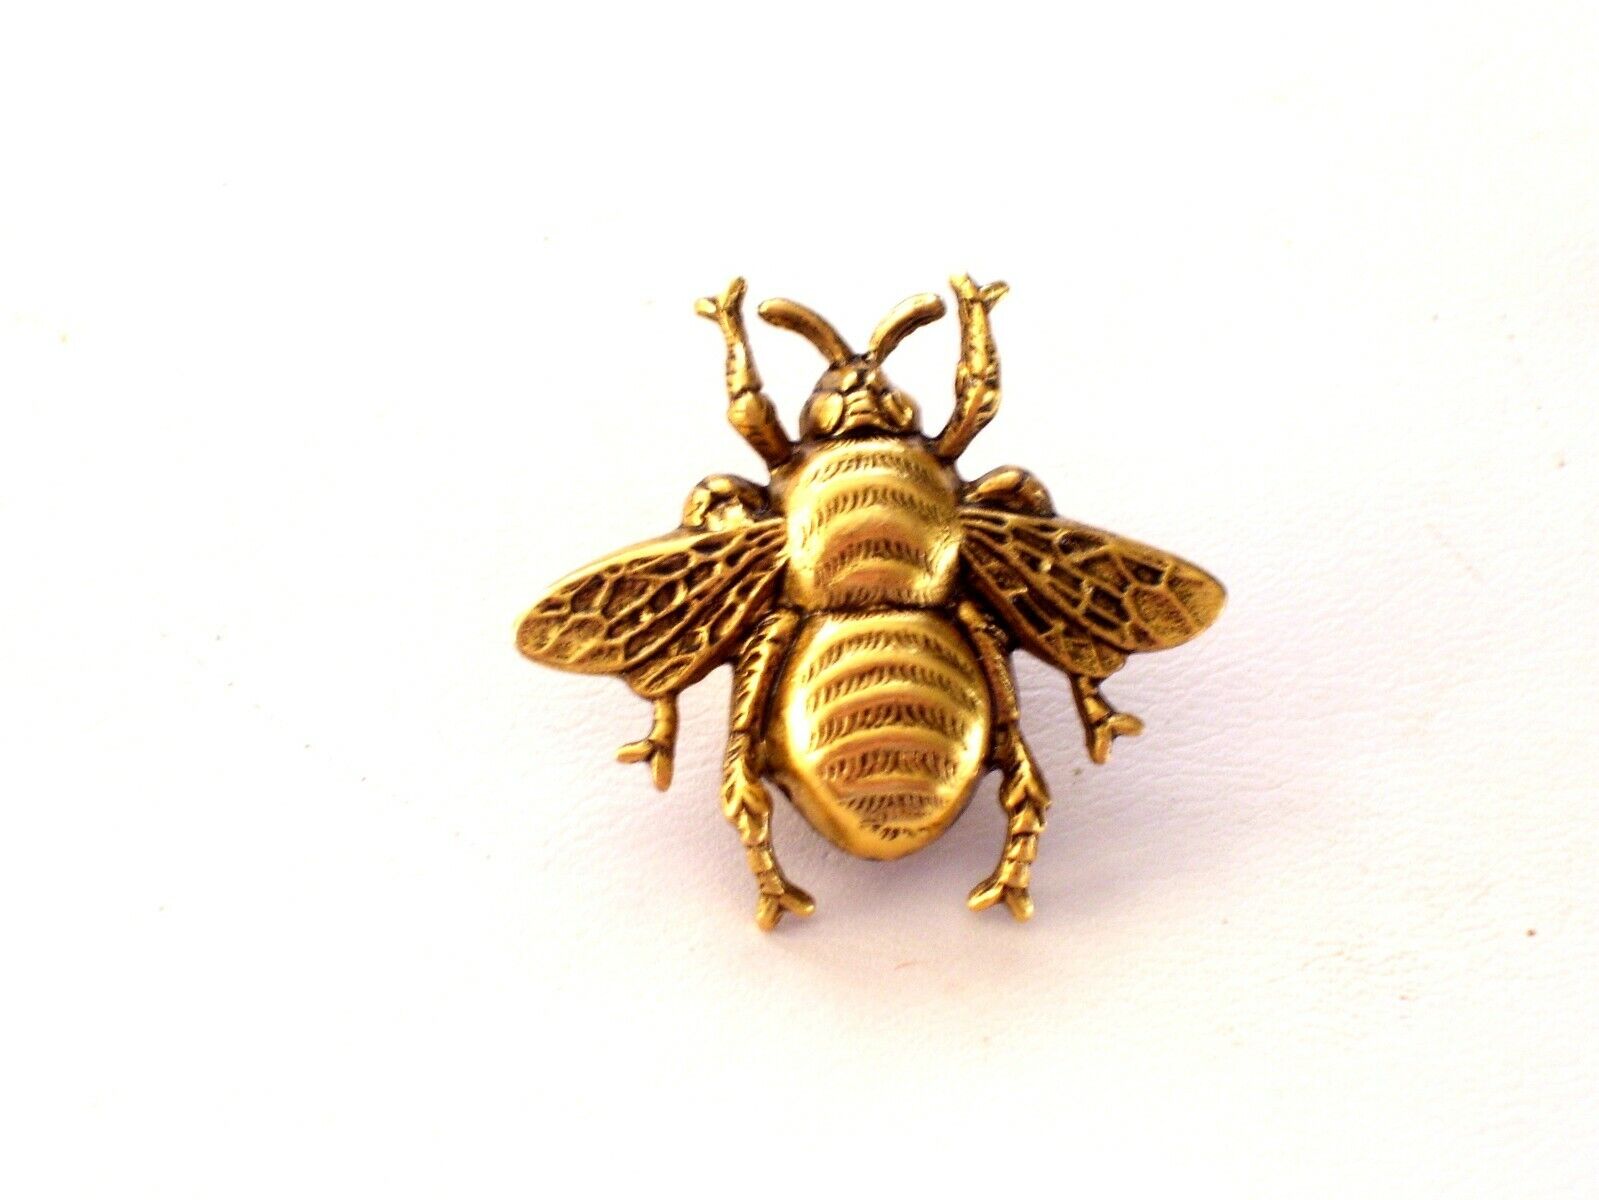 Antiqued Gold Bee Pin, Gold Bee Tie Pin, Gold Honeybee Lapel Pin